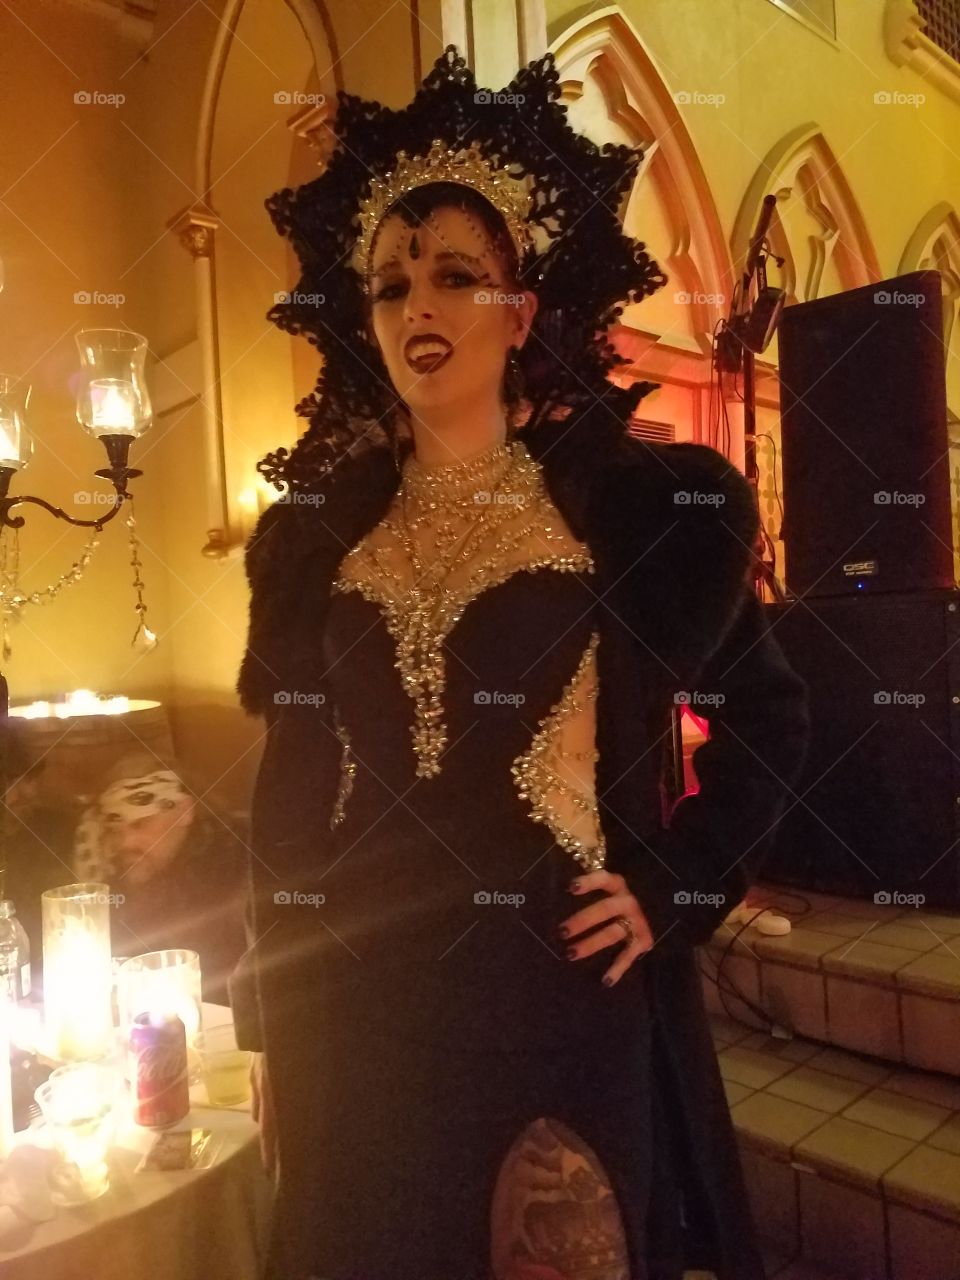 Beautiful Vampire lady at Bloodlust Vampire Ball in New Orleans.